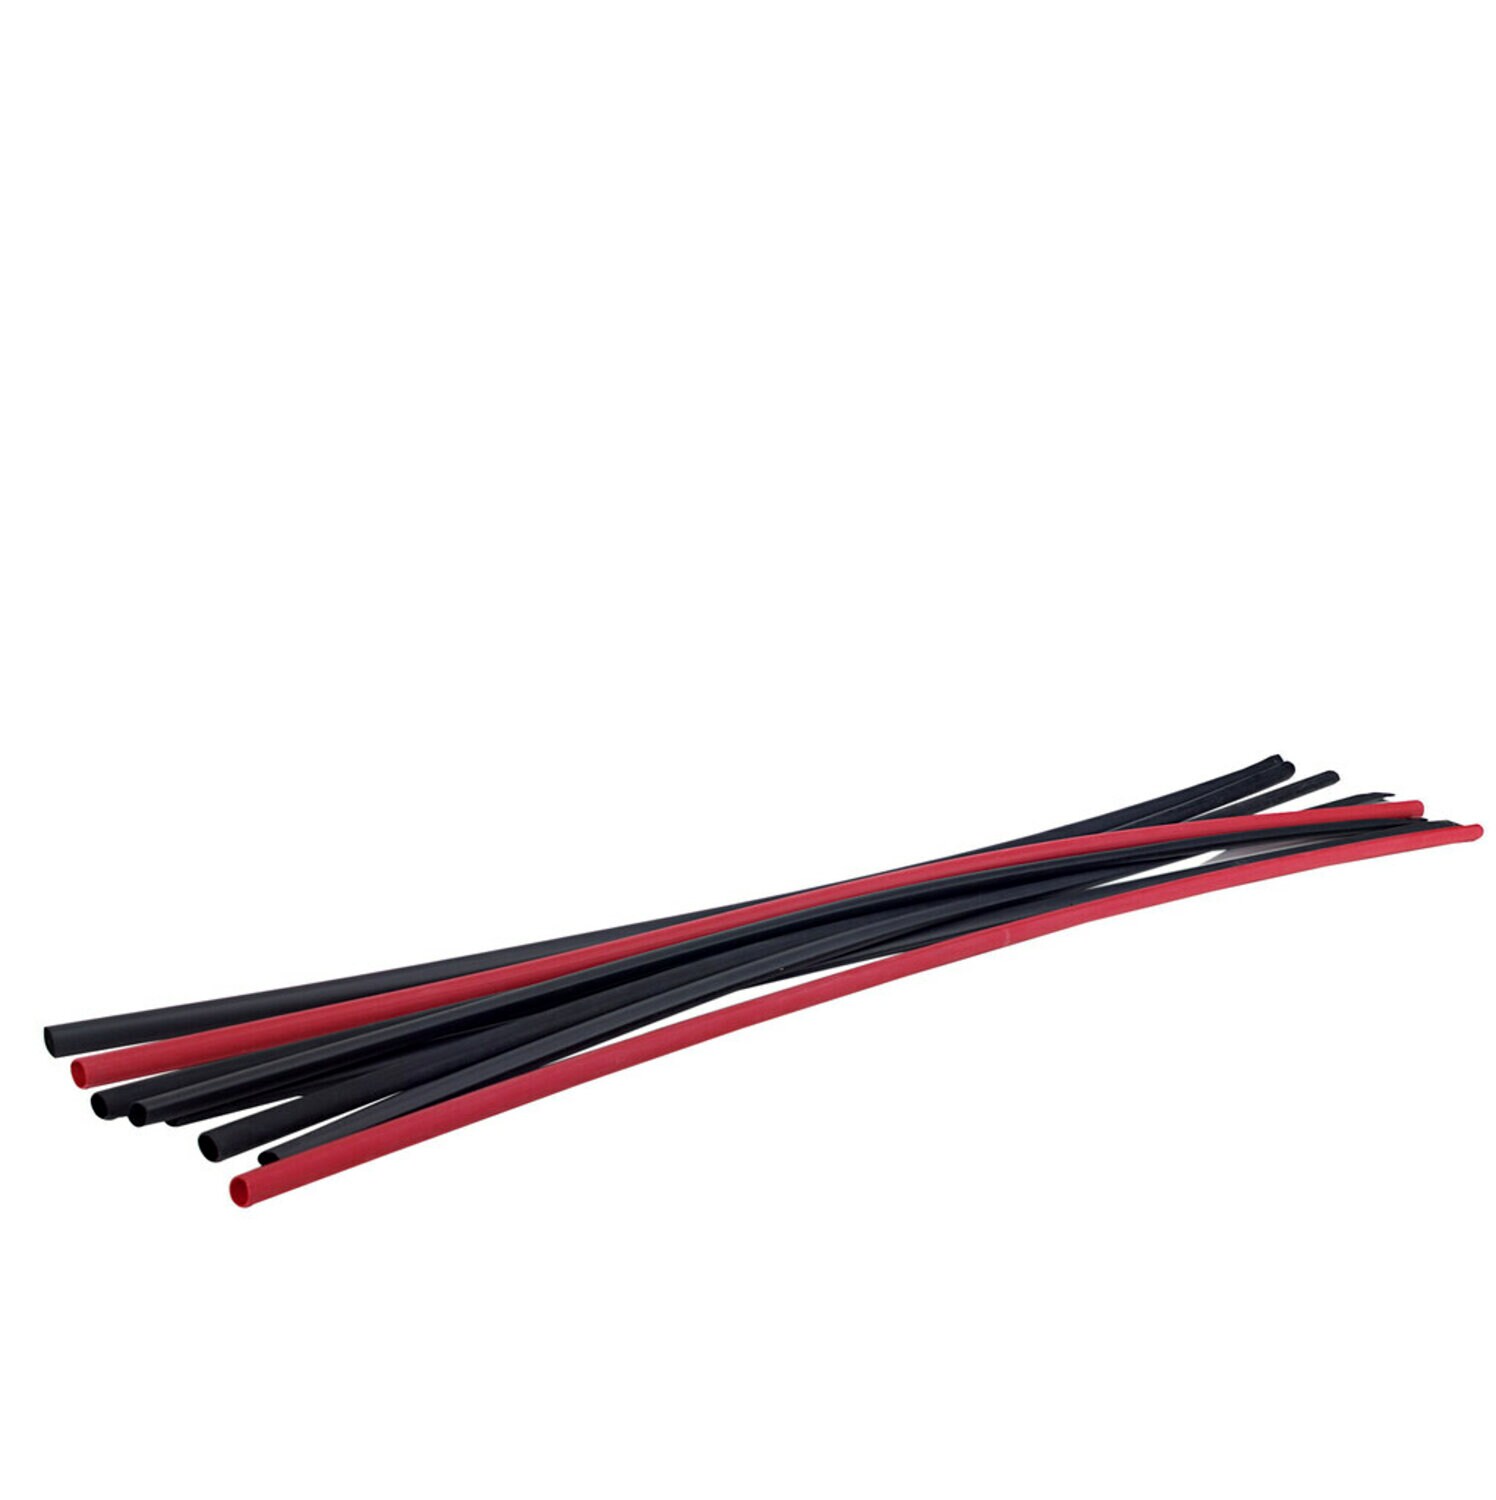 7000133560 - 3M Heat Shrink Thin-Wall Tubing FP-301-1/2-48"-Black-Hdr-12 Pcs, 48 in
Length sticks with header lable, 12 pieces/case